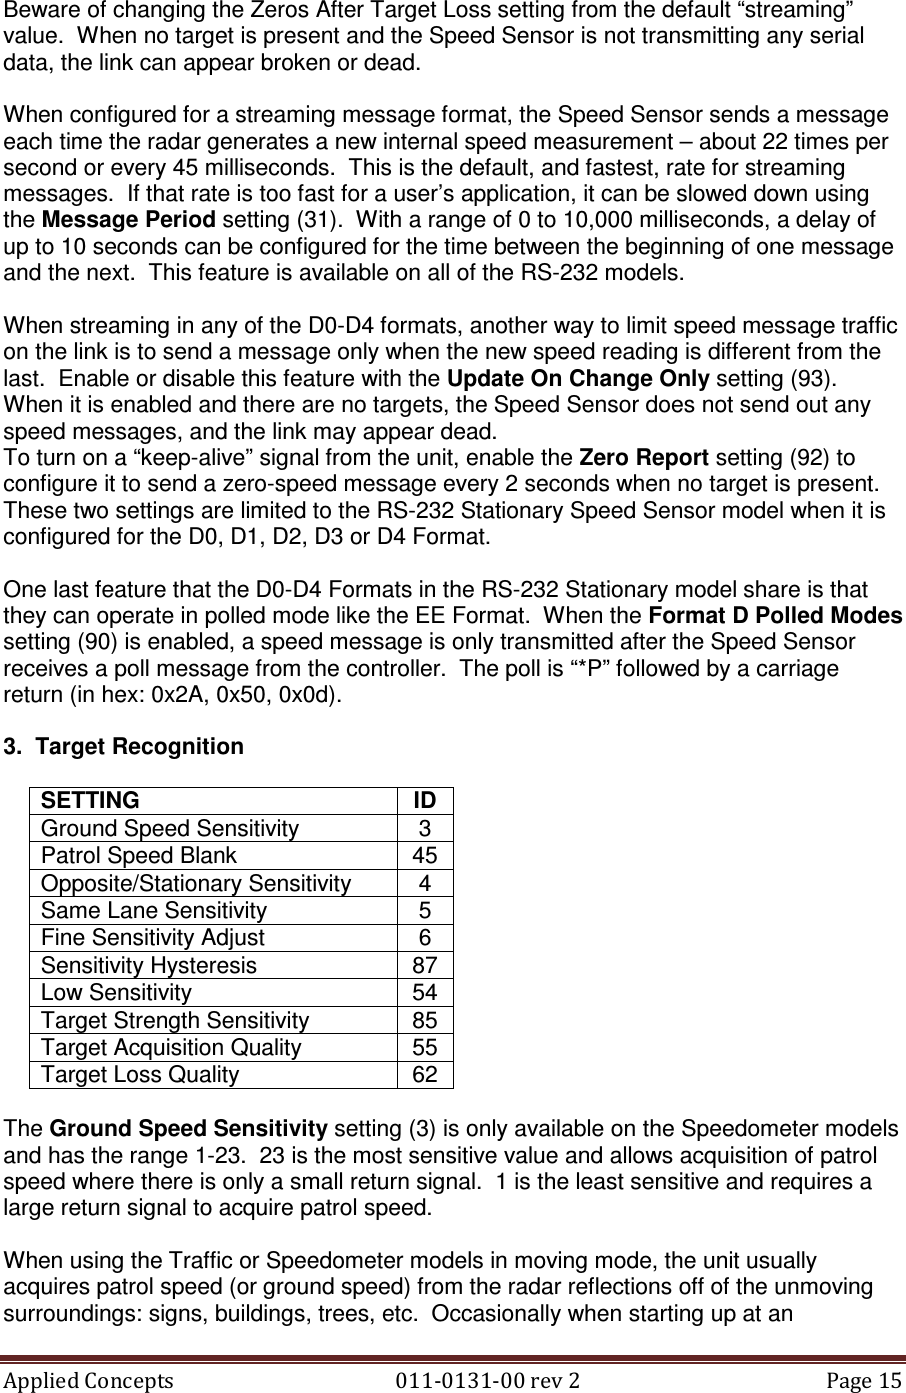 Applied Concepts                                            011-0131-00 rev 2  Page 15  Beware of changing the Zeros After Target Loss setting from the default “streaming” value.  When no target is present and the Speed Sensor is not transmitting any serial data, the link can appear broken or dead.  When configured for a streaming message format, the Speed Sensor sends a message each time the radar generates a new internal speed measurement – about 22 times per second or every 45 milliseconds.  This is the default, and fastest, rate for streaming messages.  If that rate is too fast for a user’s application, it can be slowed down using the Message Period setting (31).  With a range of 0 to 10,000 milliseconds, a delay of up to 10 seconds can be configured for the time between the beginning of one message and the next.  This feature is available on all of the RS-232 models.  When streaming in any of the D0-D4 formats, another way to limit speed message traffic on the link is to send a message only when the new speed reading is different from the last.  Enable or disable this feature with the Update On Change Only setting (93).  When it is enabled and there are no targets, the Speed Sensor does not send out any speed messages, and the link may appear dead. To turn on a “keep-alive” signal from the unit, enable the Zero Report setting (92) to configure it to send a zero-speed message every 2 seconds when no target is present.  These two settings are limited to the RS-232 Stationary Speed Sensor model when it is configured for the D0, D1, D2, D3 or D4 Format.  One last feature that the D0-D4 Formats in the RS-232 Stationary model share is that they can operate in polled mode like the EE Format.  When the Format D Polled Modes setting (90) is enabled, a speed message is only transmitted after the Speed Sensor receives a poll message from the controller.  The poll is “*P” followed by a carriage return (in hex: 0x2A, 0x50, 0x0d).  3.  Target Recognition  SETTING  ID Ground Speed Sensitivity  3 Patrol Speed Blank  45 Opposite/Stationary Sensitivity  4 Same Lane Sensitivity  5 Fine Sensitivity Adjust  6 Sensitivity Hysteresis  87 Low Sensitivity  54 Target Strength Sensitivity  85 Target Acquisition Quality  55 Target Loss Quality  62  The Ground Speed Sensitivity setting (3) is only available on the Speedometer models and has the range 1-23.  23 is the most sensitive value and allows acquisition of patrol speed where there is only a small return signal.  1 is the least sensitive and requires a large return signal to acquire patrol speed.  When using the Traffic or Speedometer models in moving mode, the unit usually acquires patrol speed (or ground speed) from the radar reflections off of the unmoving surroundings: signs, buildings, trees, etc.  Occasionally when starting up at an 